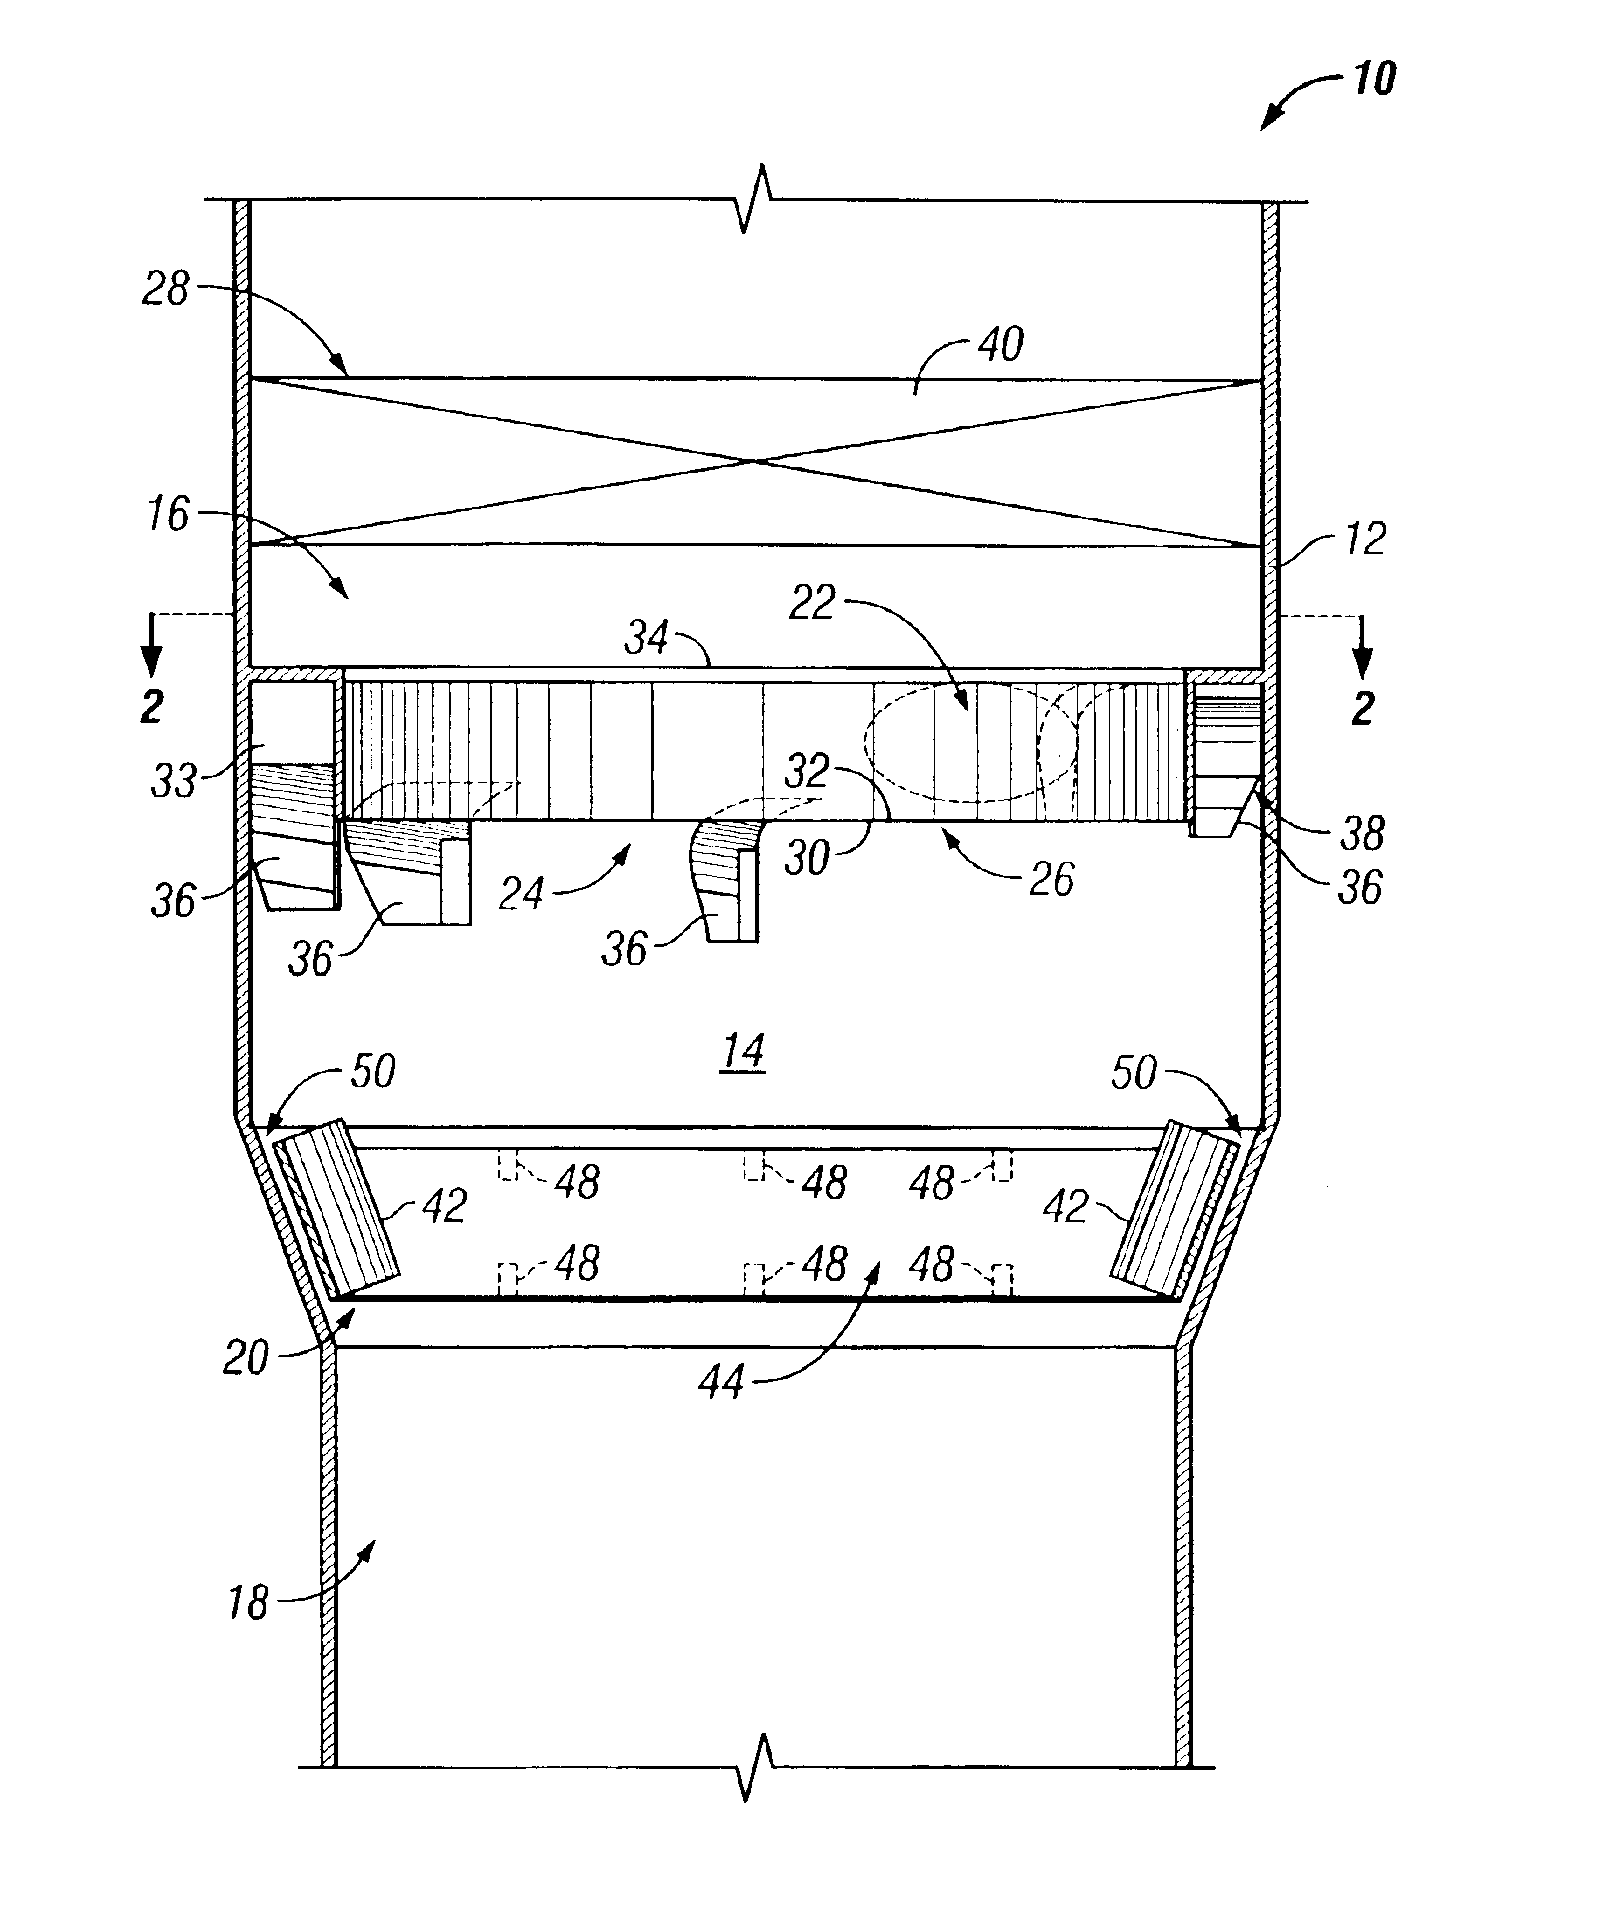 Method and apparatus for facilitating more uniform vapor distribution in mass transfer and heat exchange columns